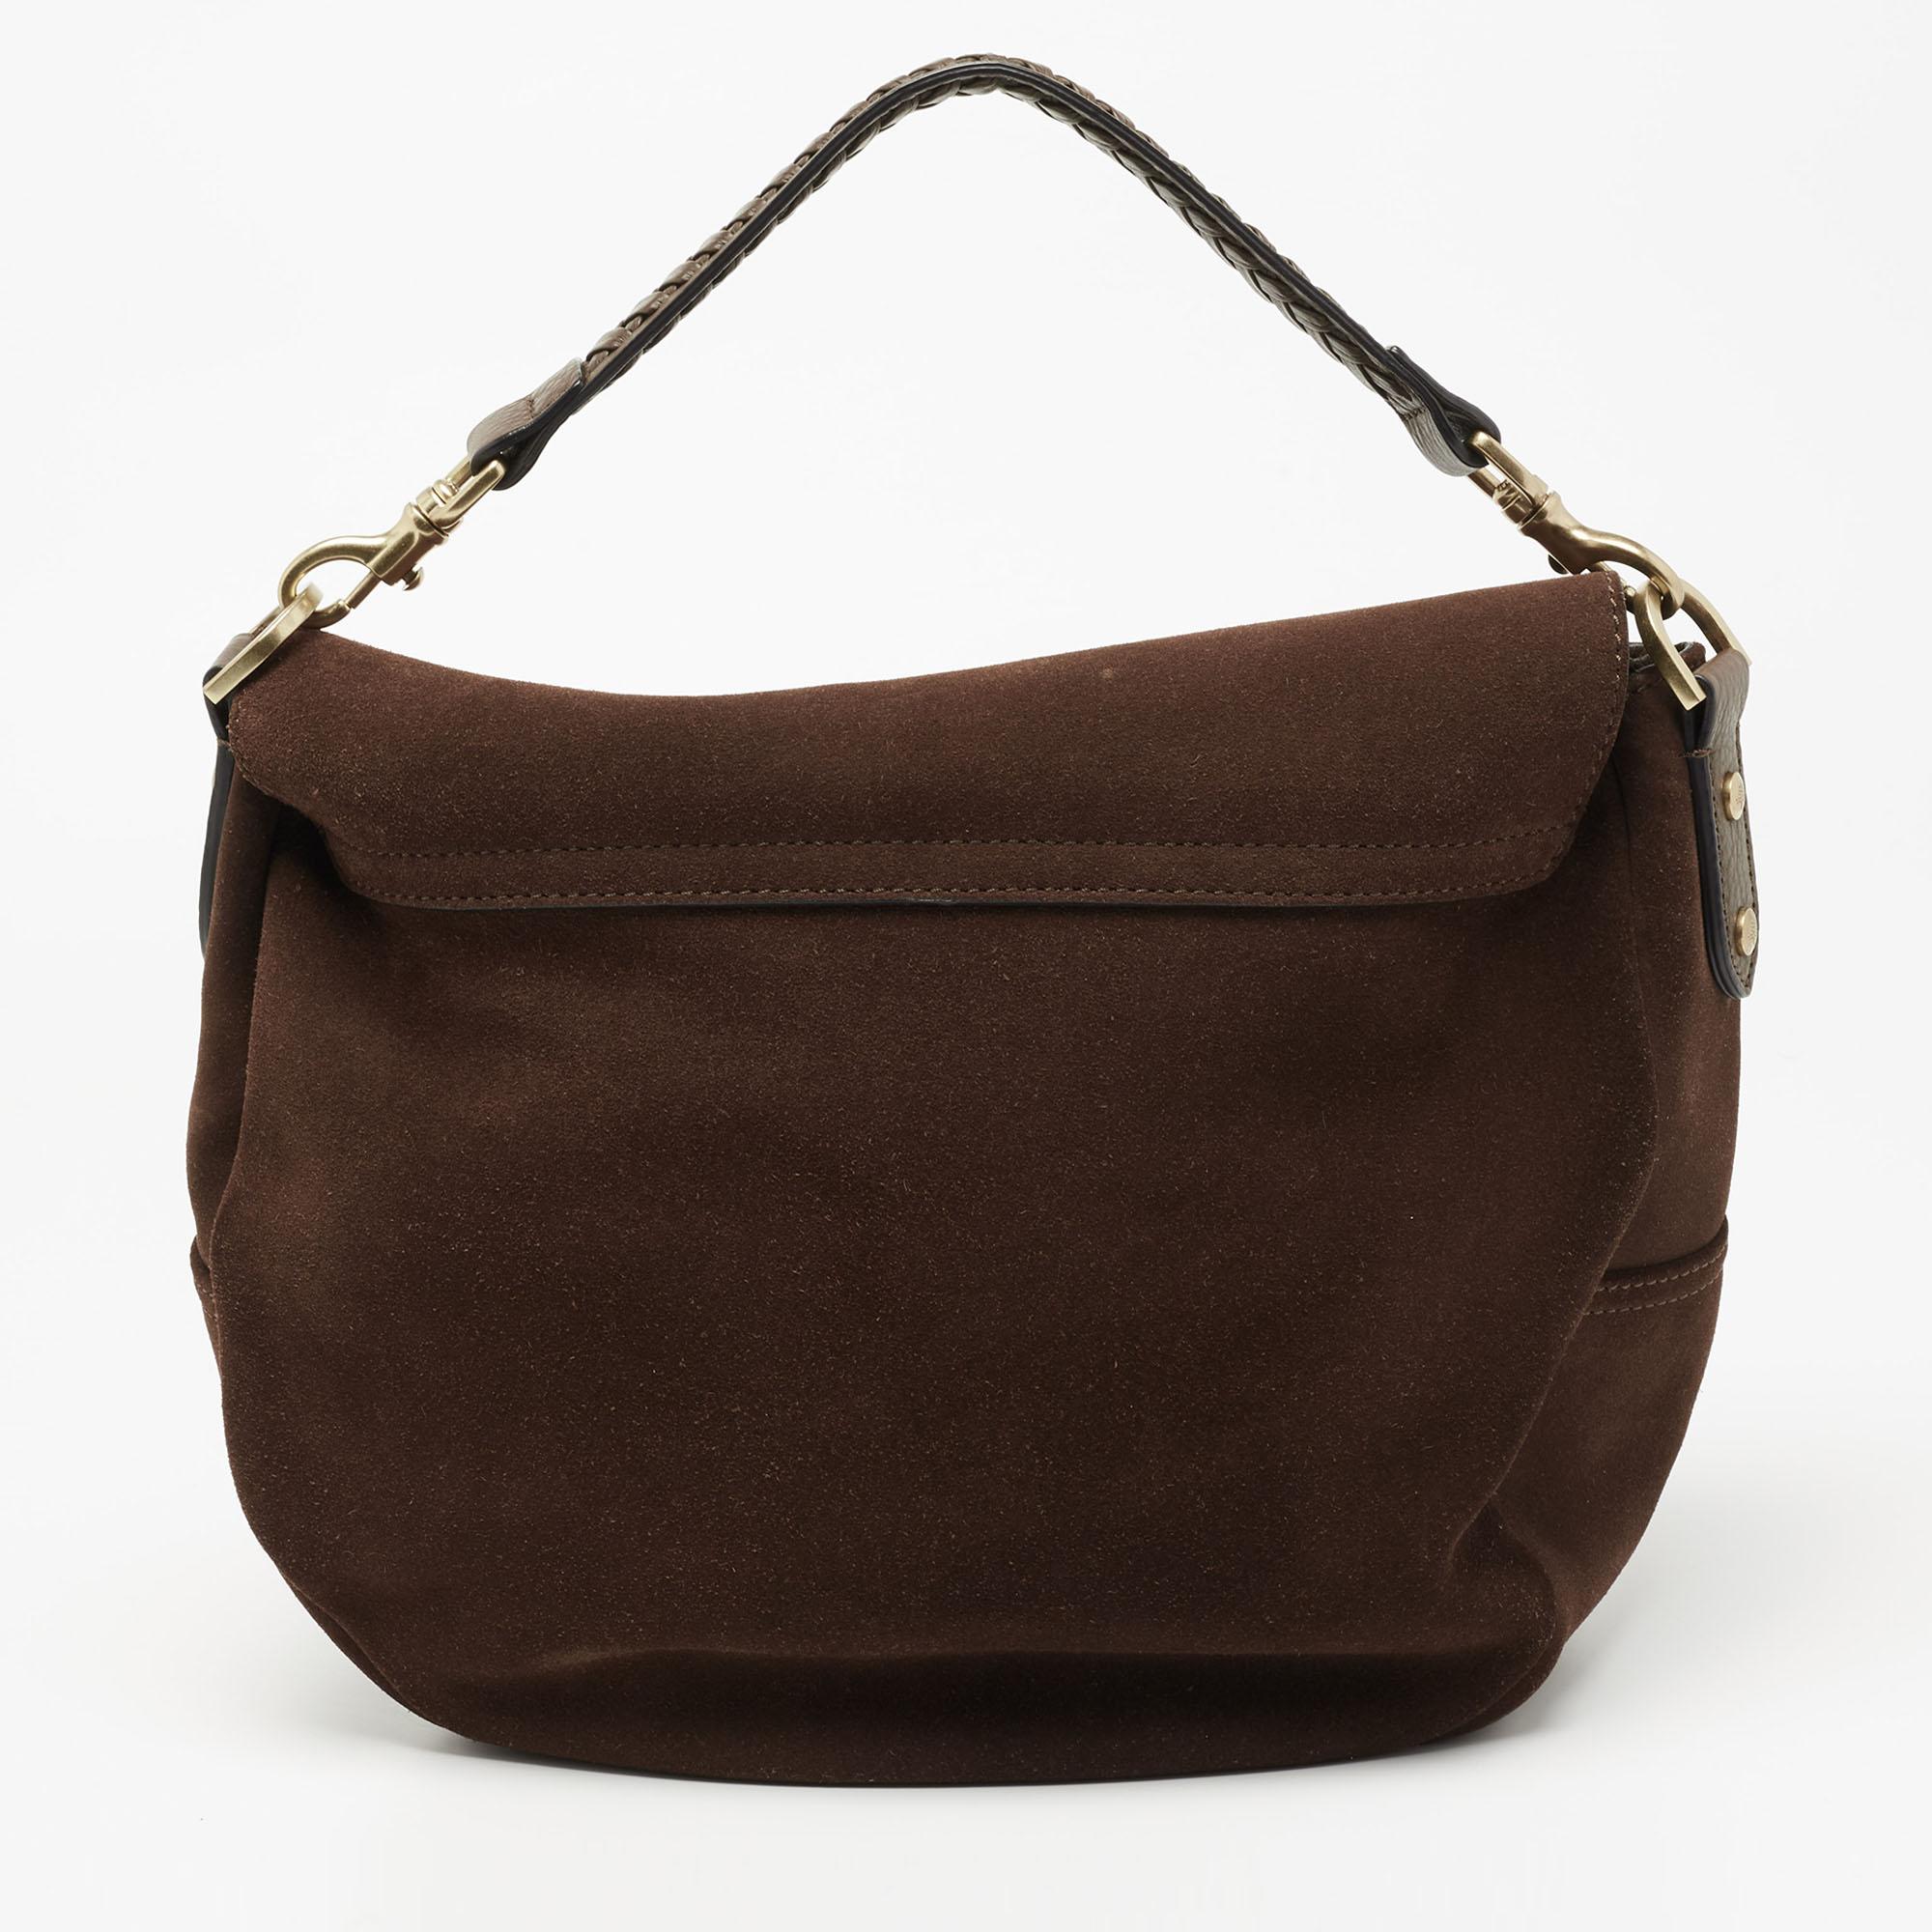 Easy to carry and stylish in appearance, this Effie satchel from Mulberry will certainly be your favorite pick this season. It is crafted using dark-brown suede and leather, with gold-tone hardware elevating its beauty. It provides two handles and a